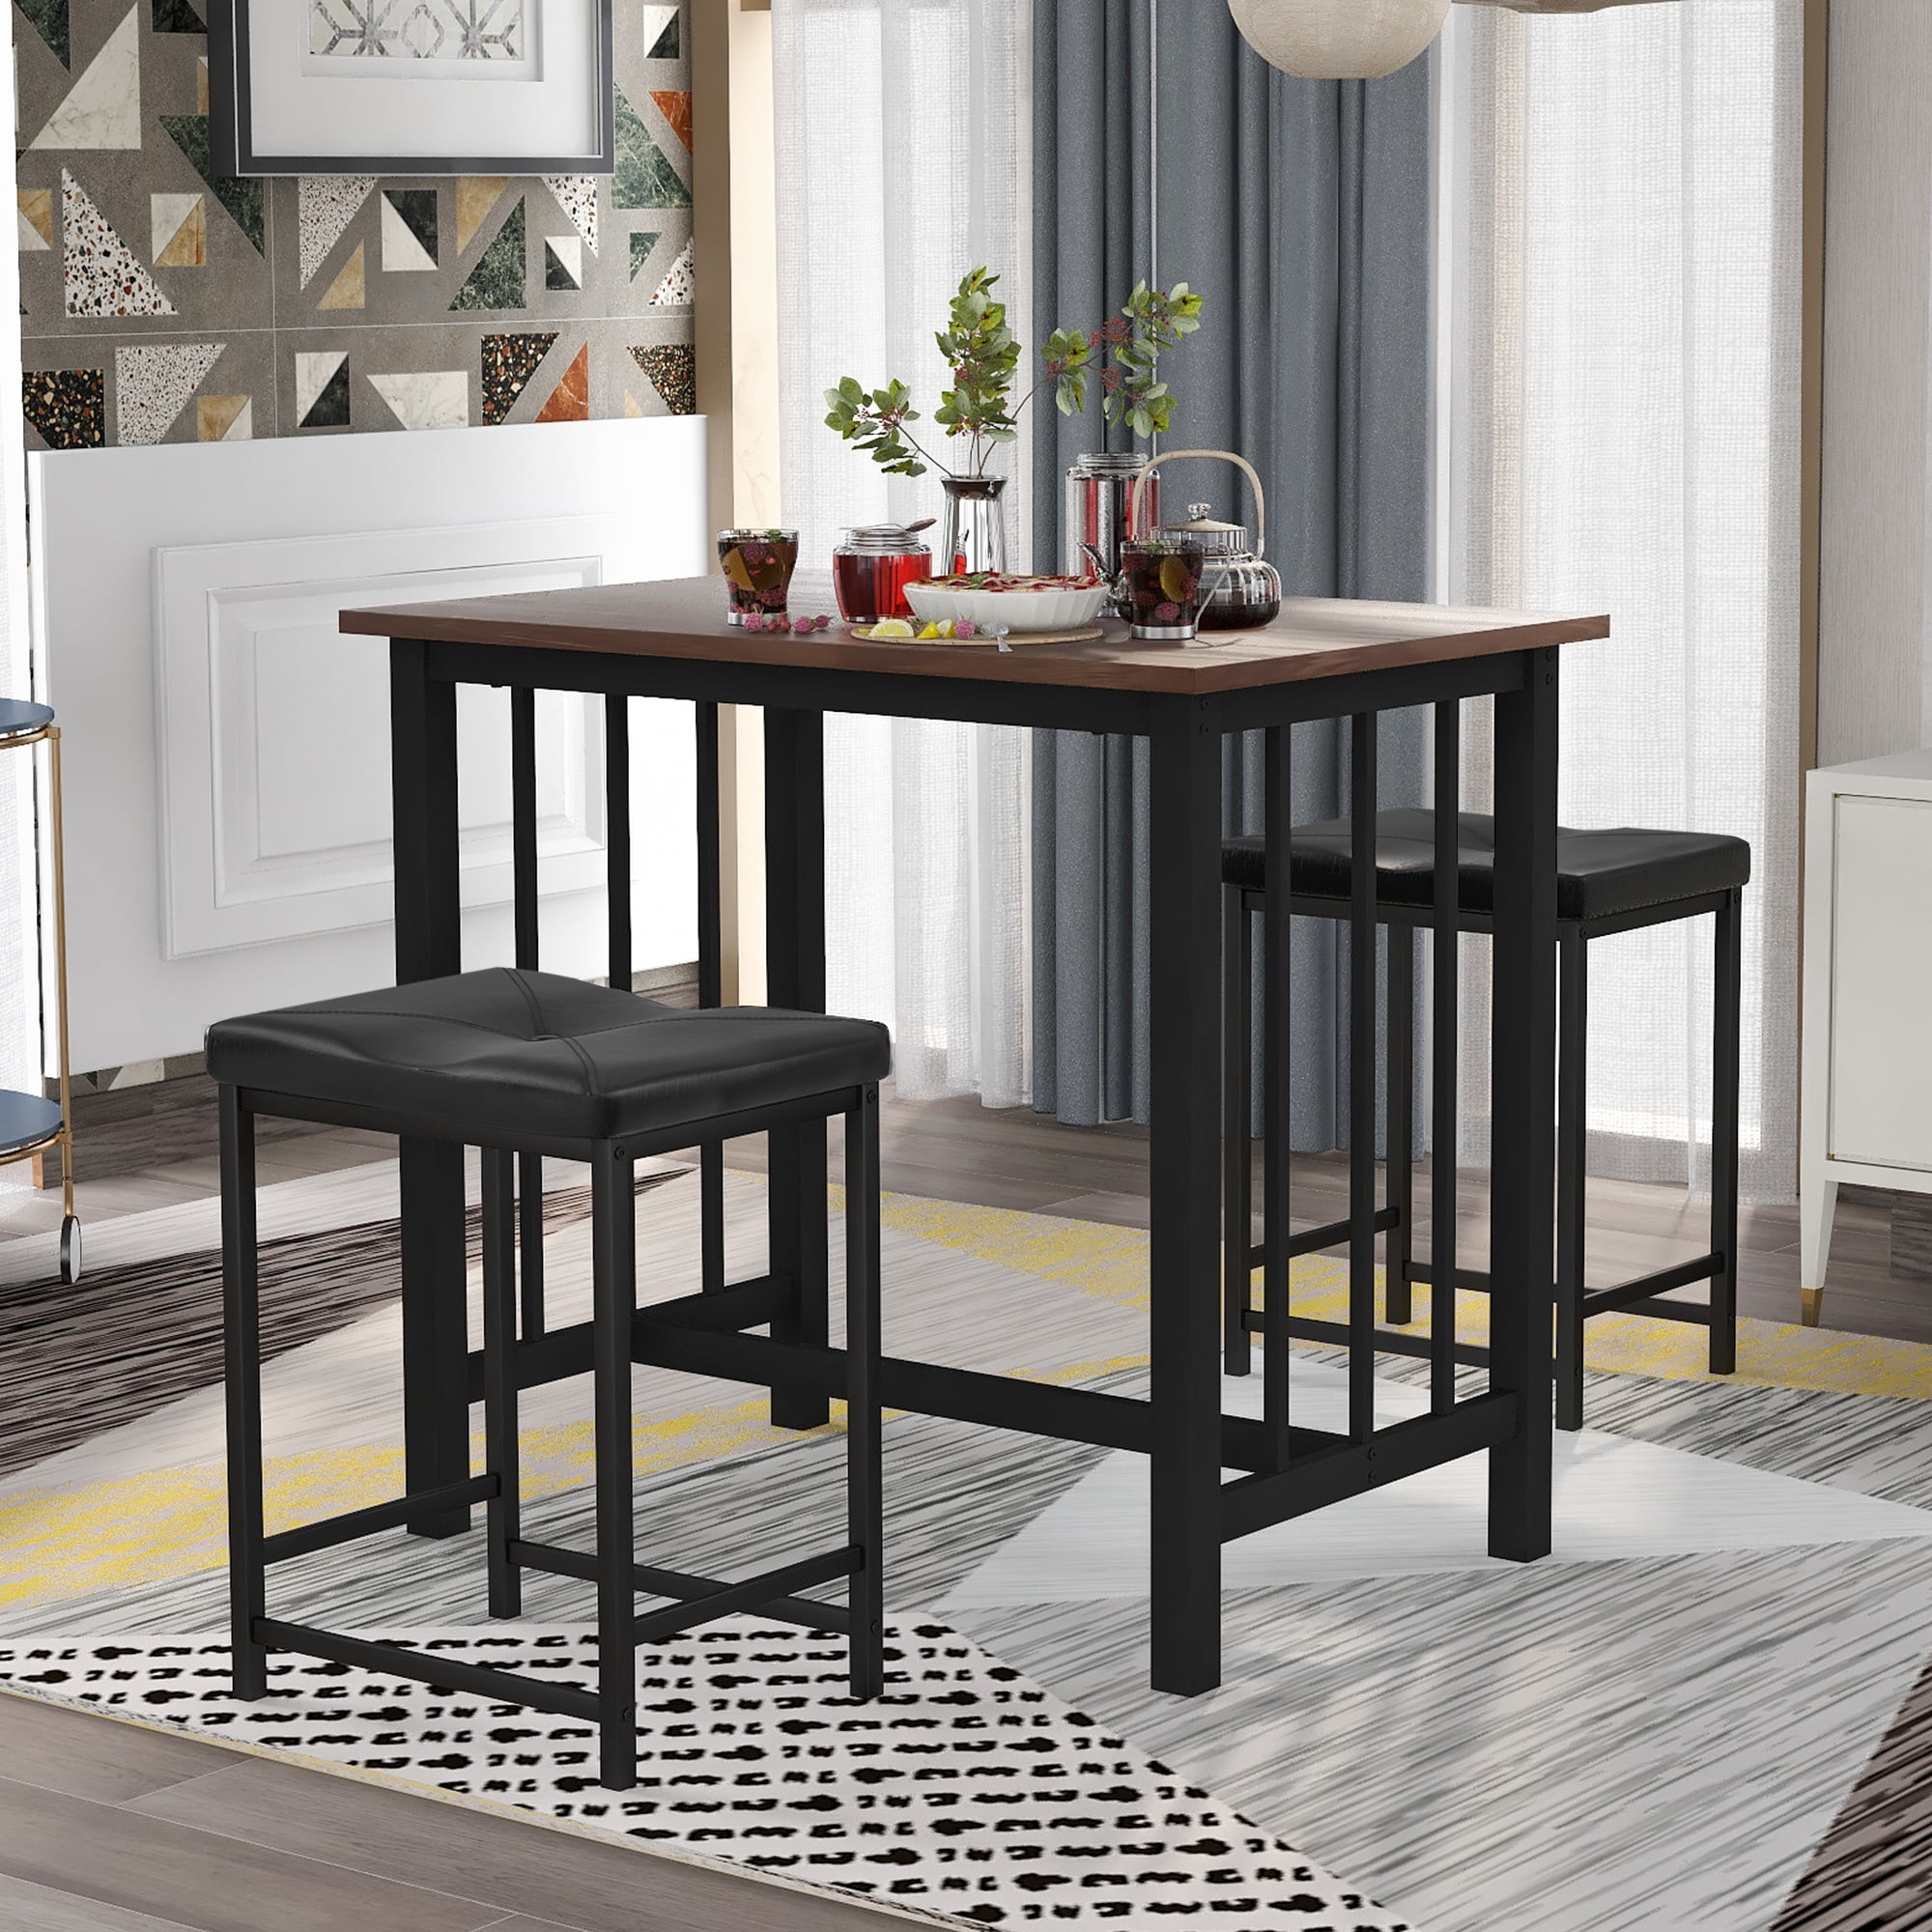 Counter Height Table Sets For Small Spaces : 5-Piece Kitchen Table and